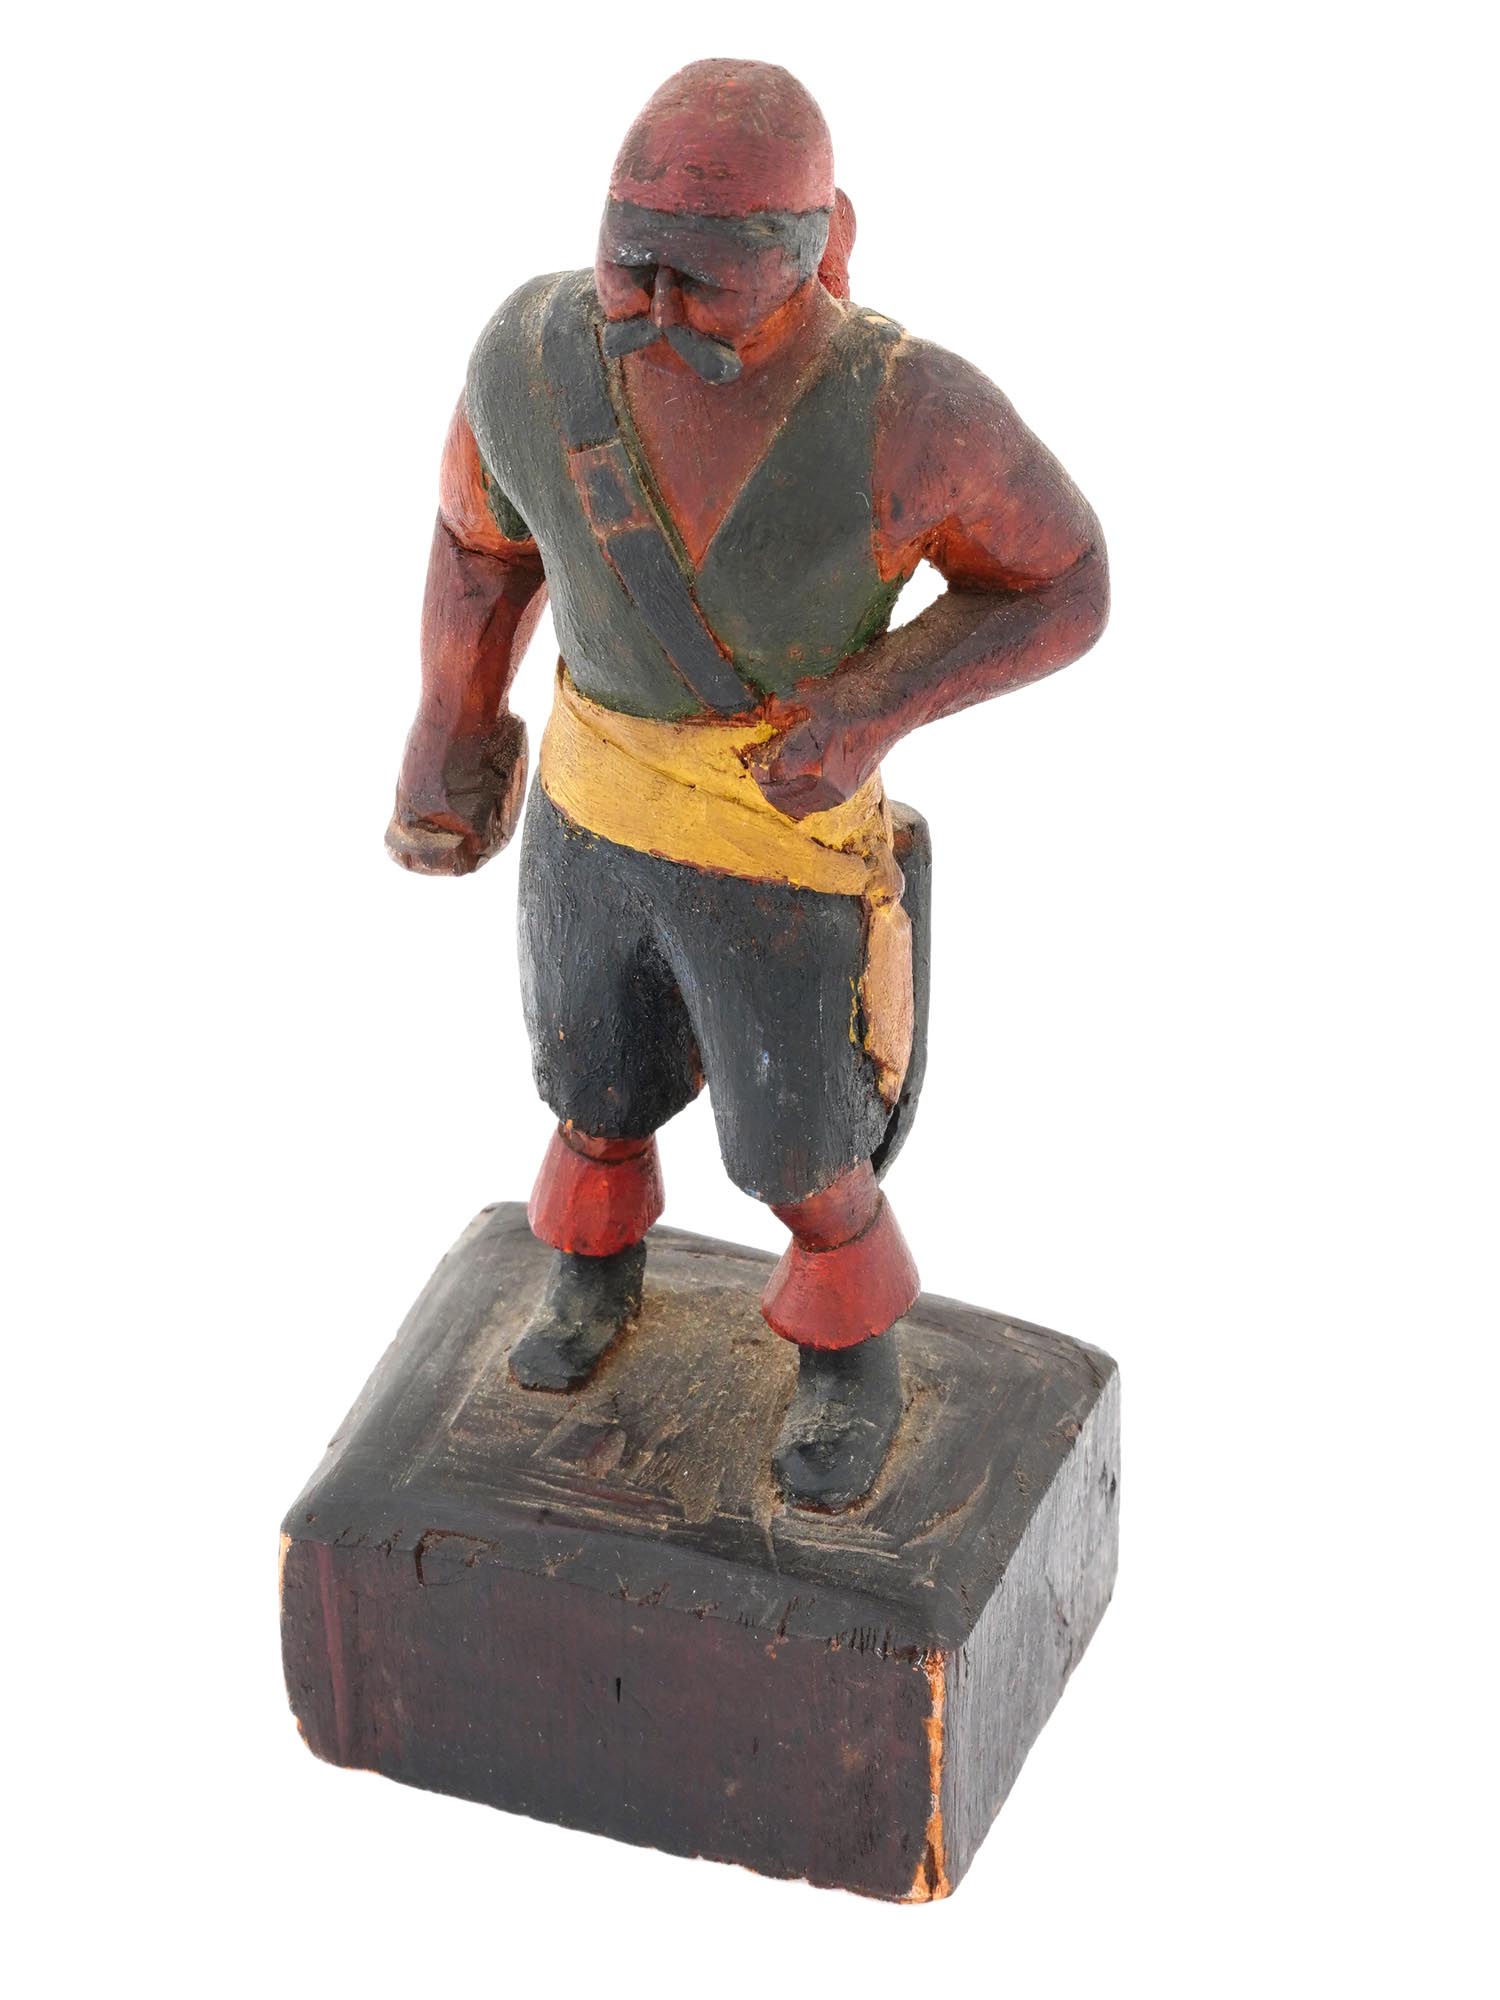 AMERICAN FOLK ART HAND CARVED WOOD FIGURE OF PIRATE PIC-1